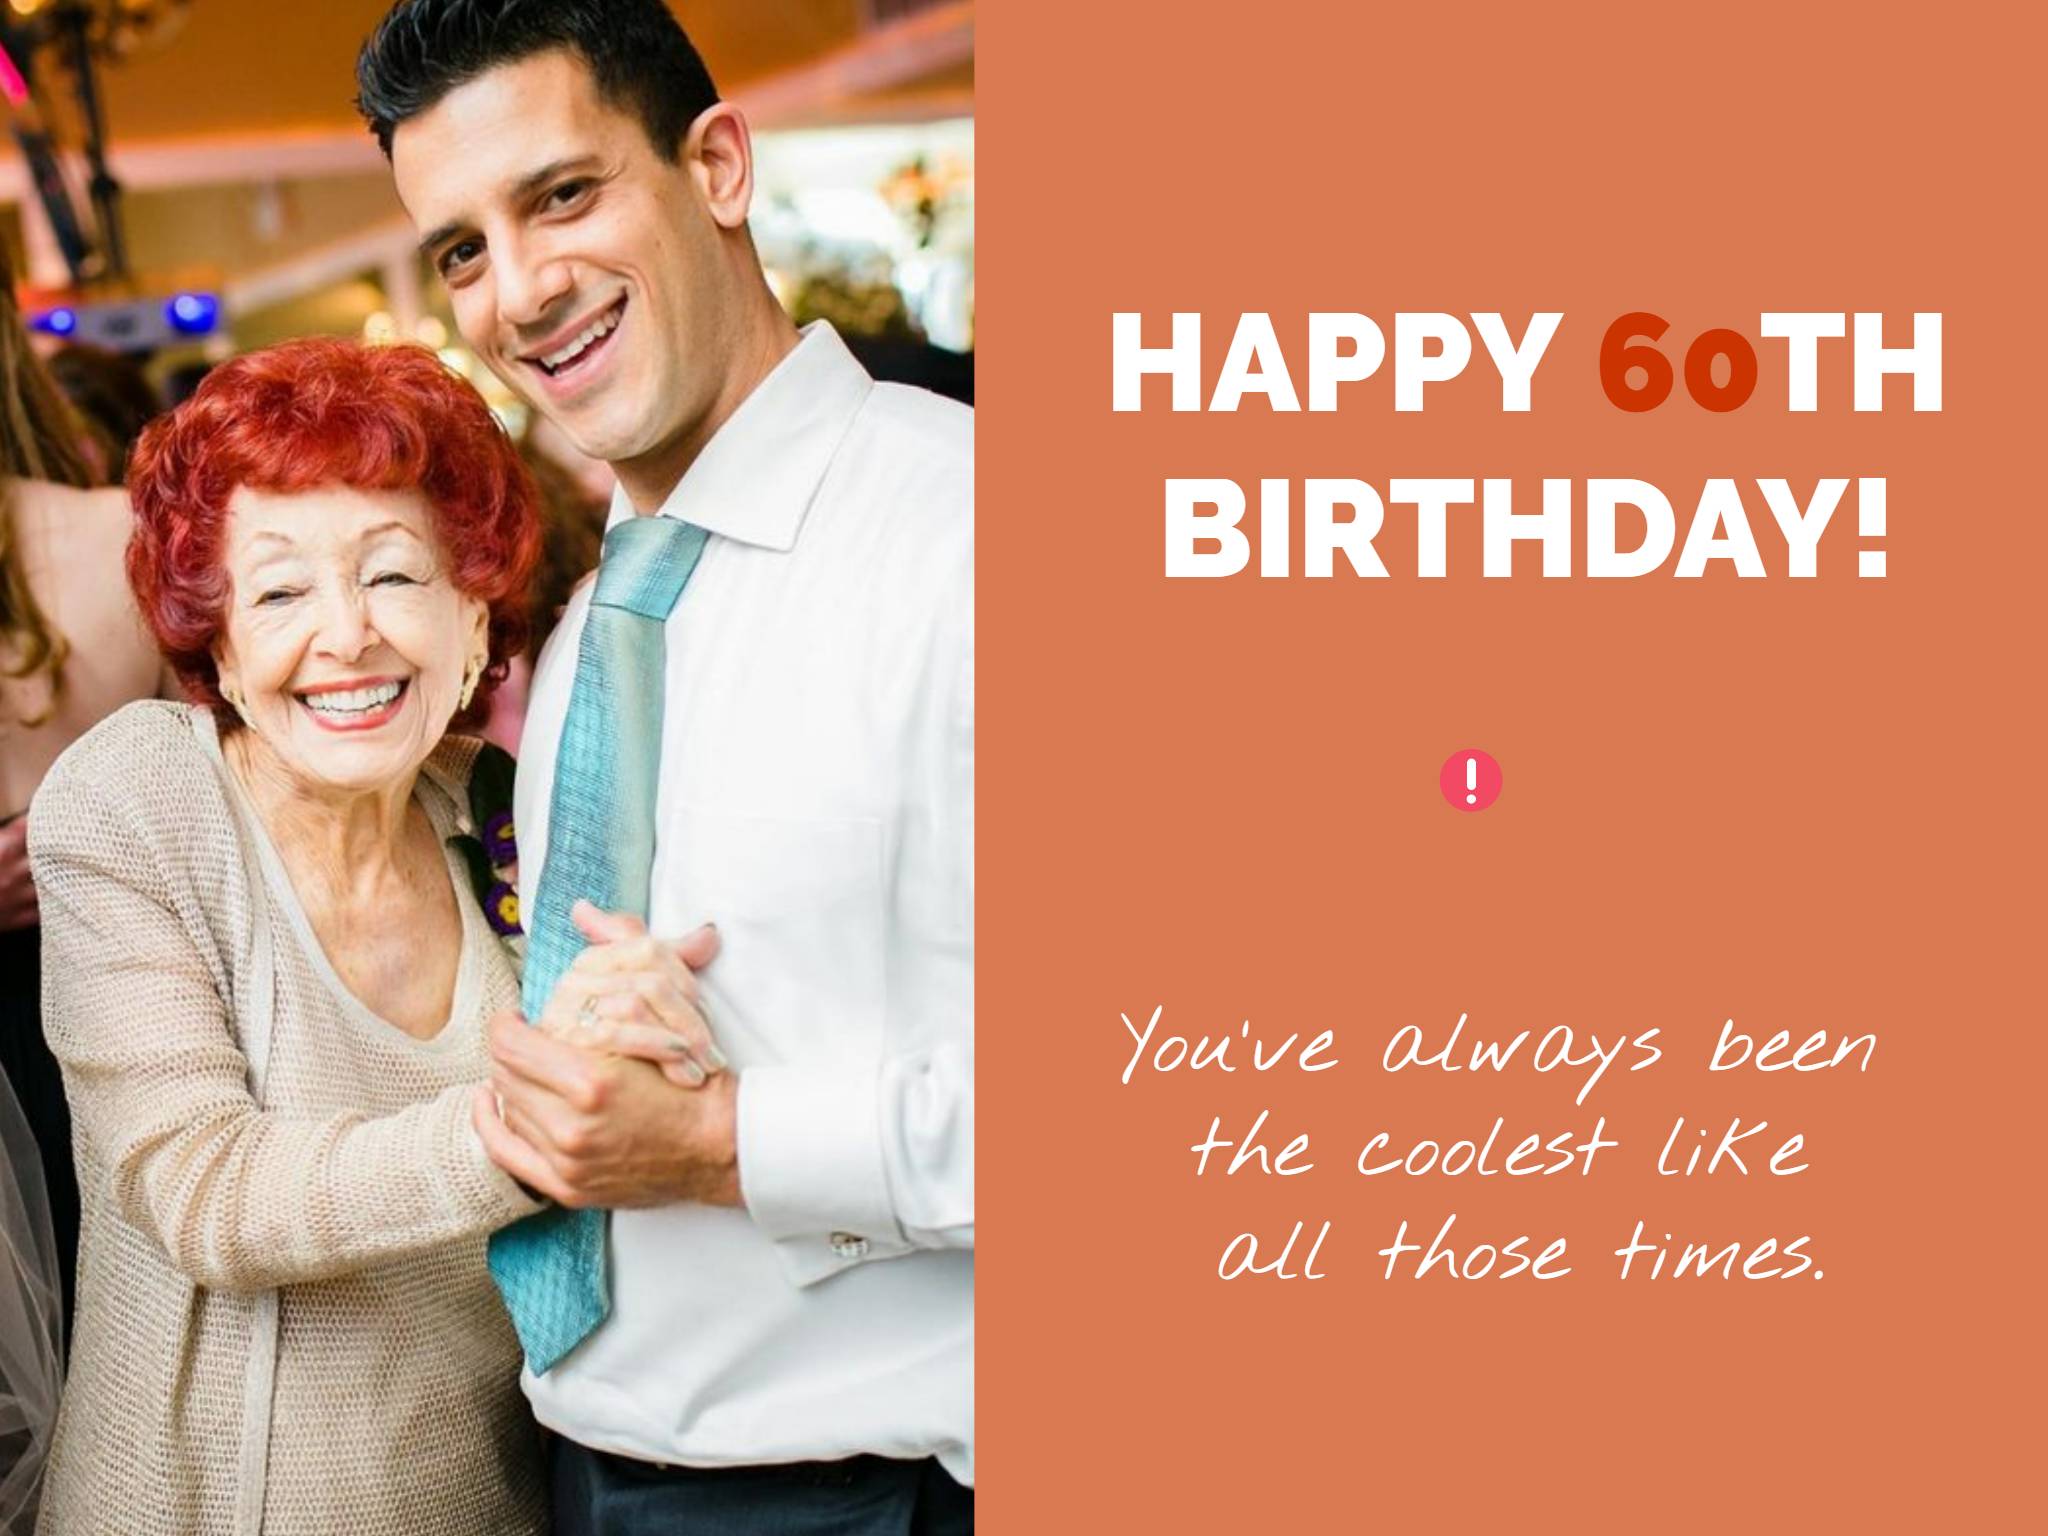 short love quotes for grandma to wish her happy birthday with a nice picture